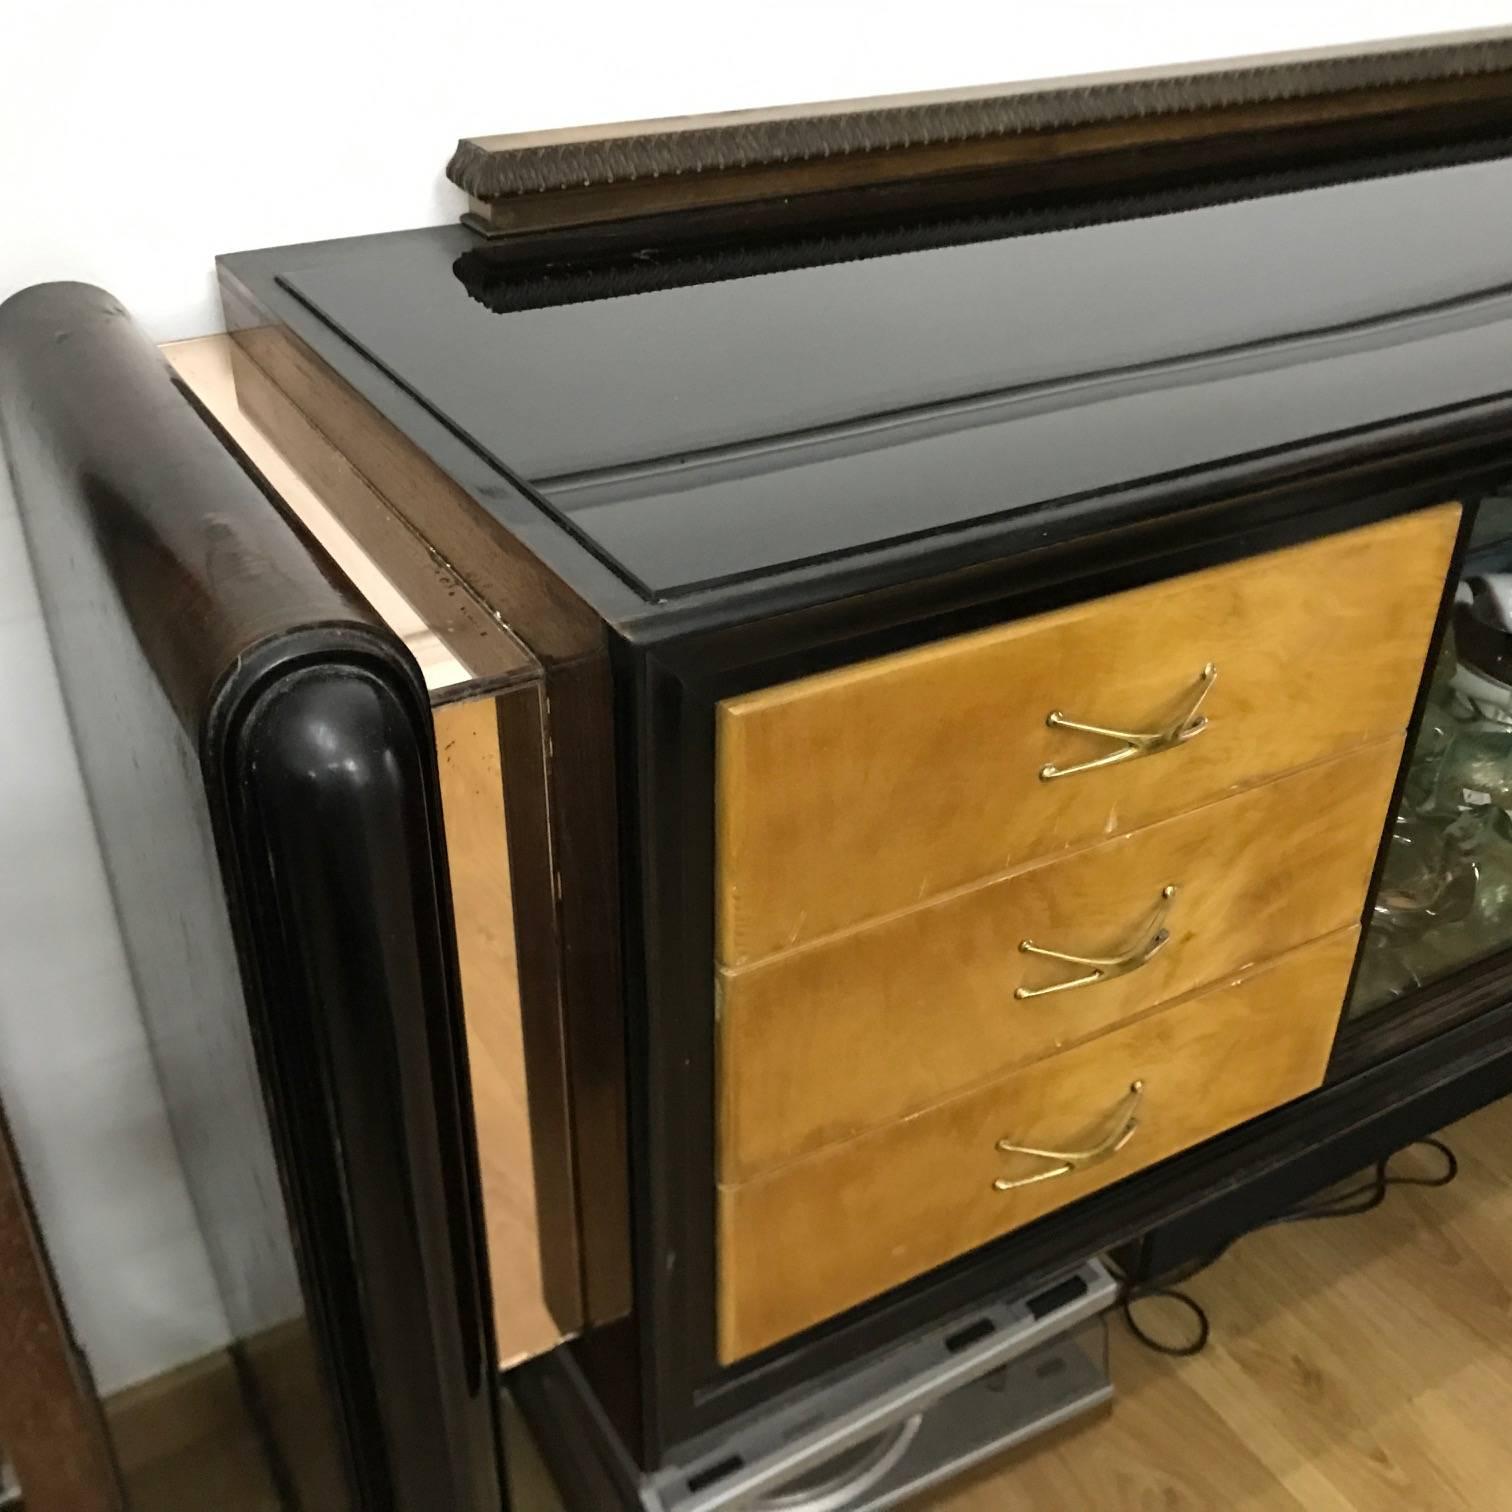 Italian Art Deco sideboard made in Como Northern Italy in the 1920s, three kind of wood, mahogany, maple and black painted wood, pink glass mirror inserts on the sides, black glass on the top, etched glass on the front.
This sideboard features a